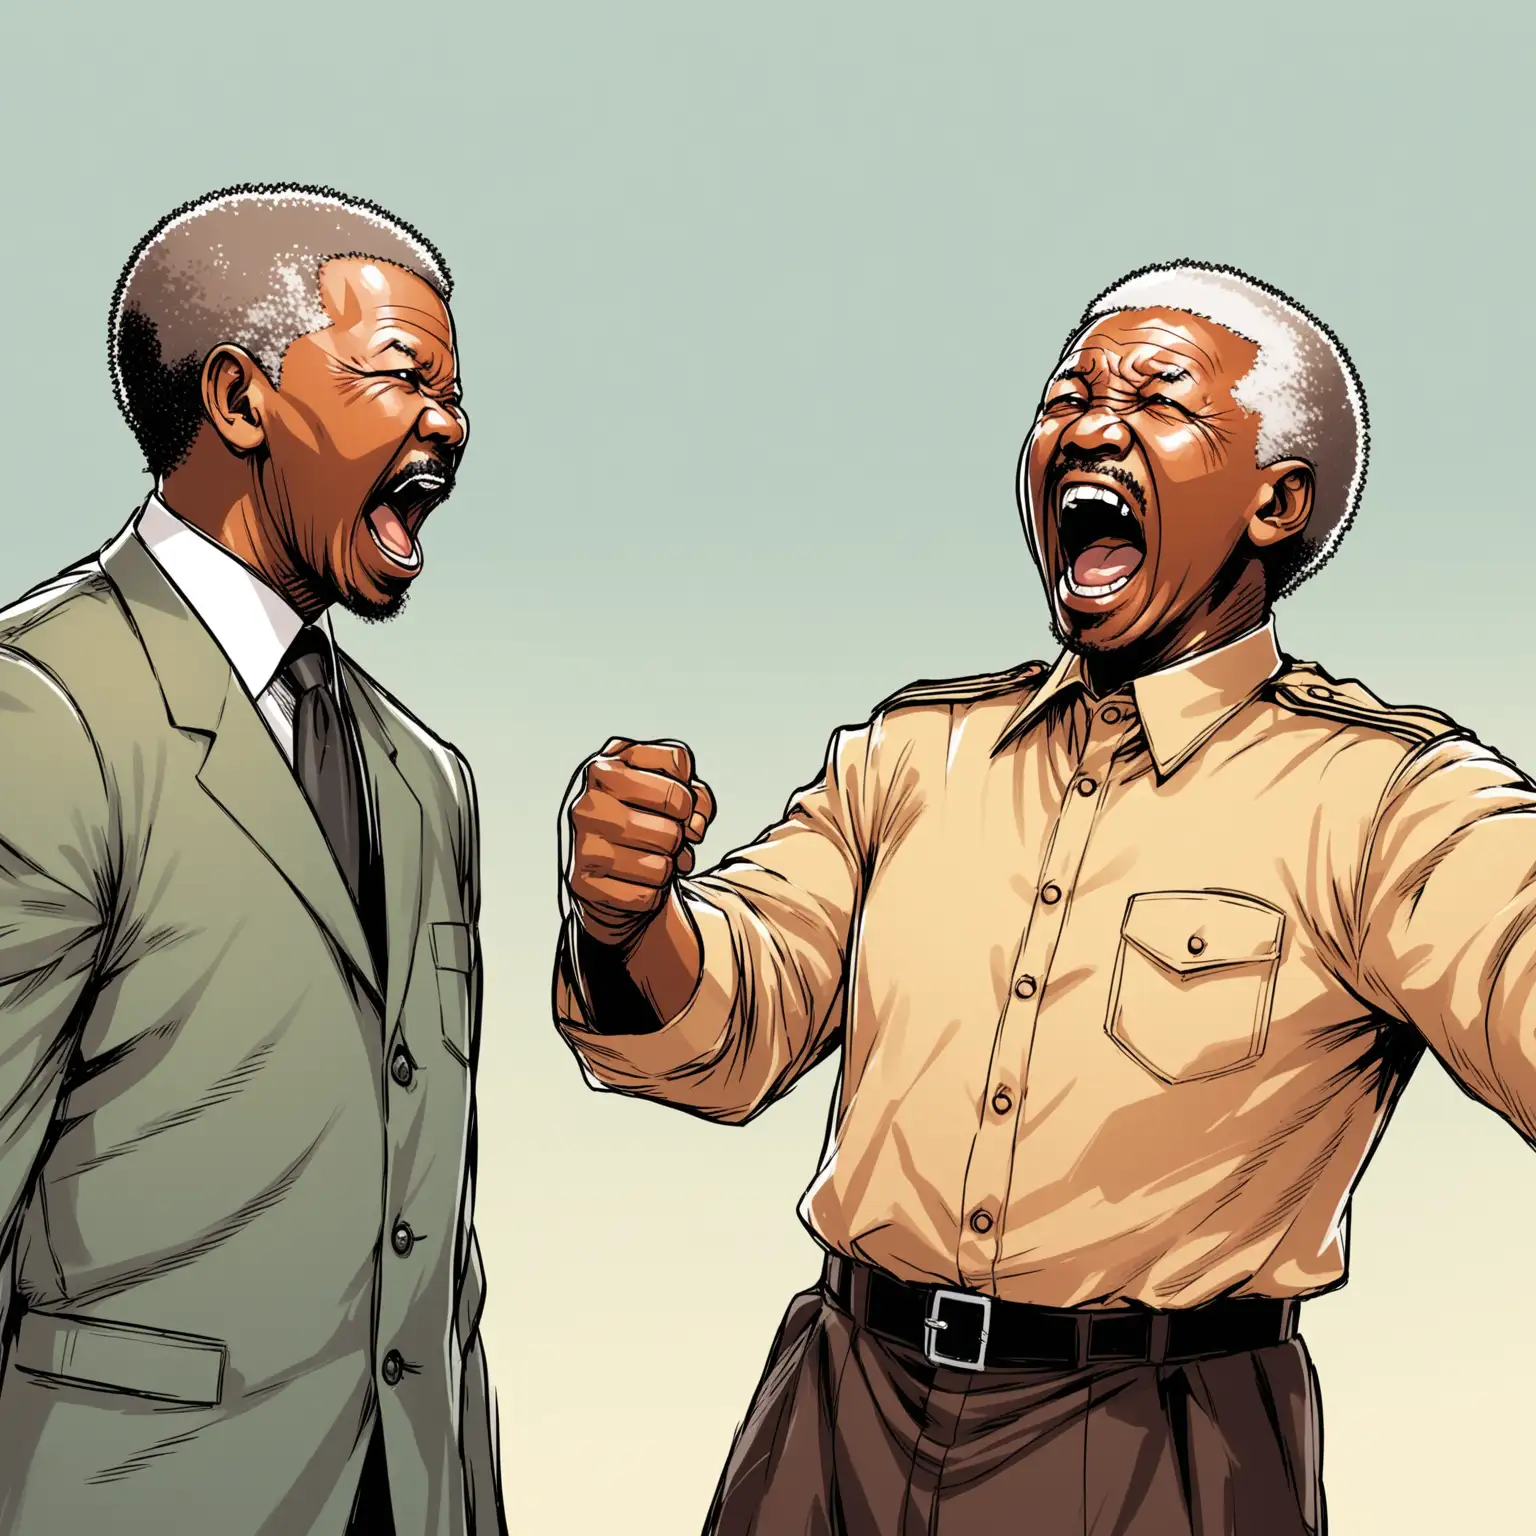 Nelson Mandela Mediates Argument Between Black and White Individuals in Cartoon Style